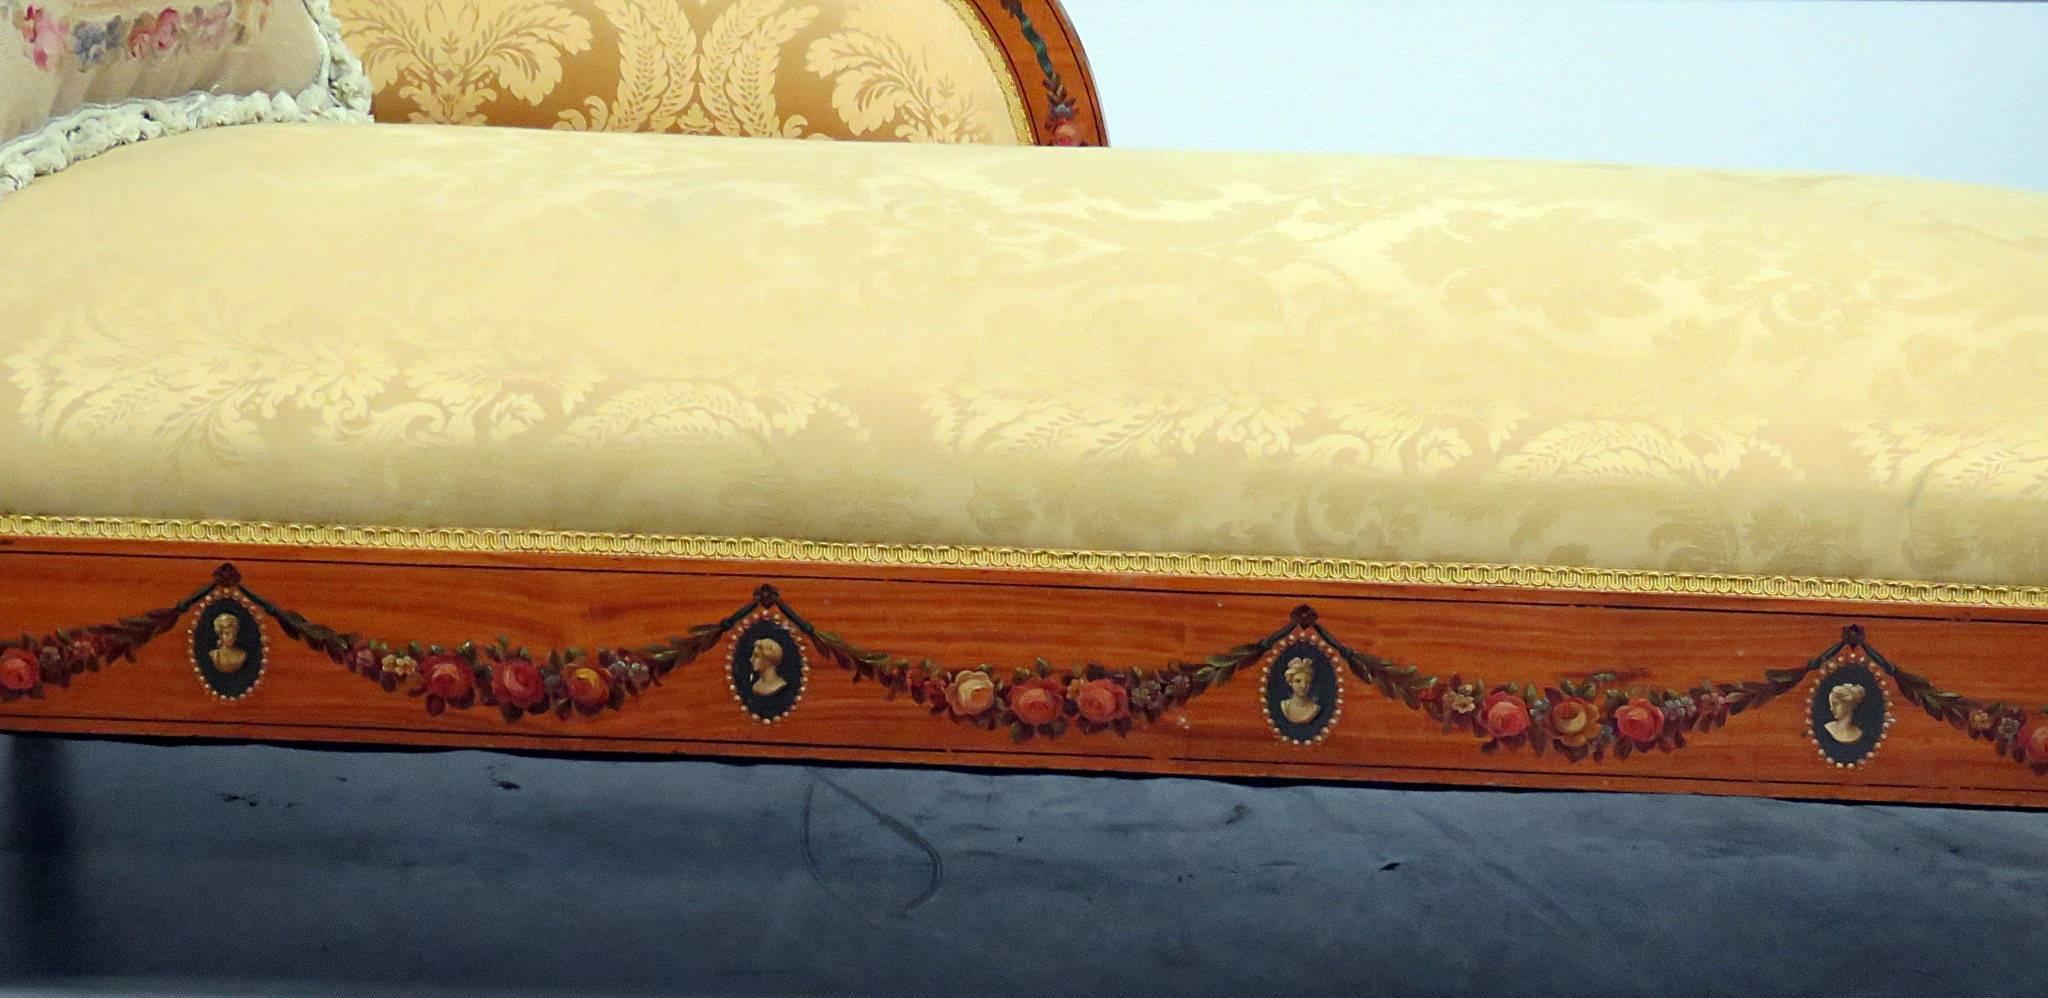 Adams style chaise longue with detailed paint decor and throw pillow.  18